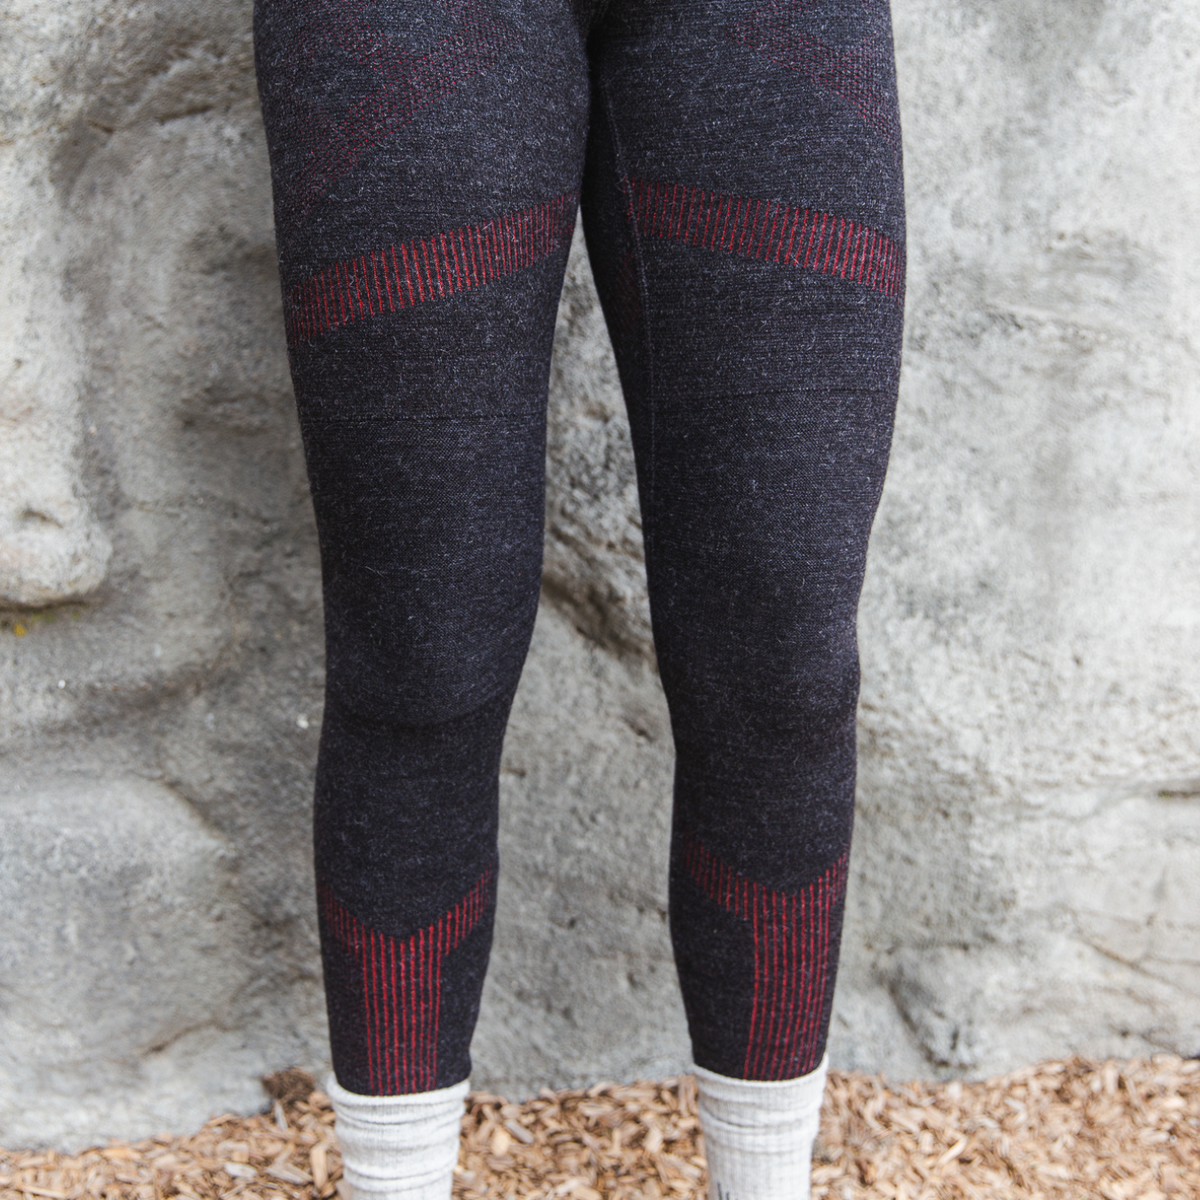 A photo from the thighs down of a woman standing in front of a stone wall wearing a pair of the Alpacas of Montana warm underlayer cozy comfortable thermal moisture wicking long johns winter outerwear heavyweight antimicrobial alpaca wool women&#39;s red and black base layer bottoms for skiing, snowboarding, ice fishing, hunting, camping, arctic, travel